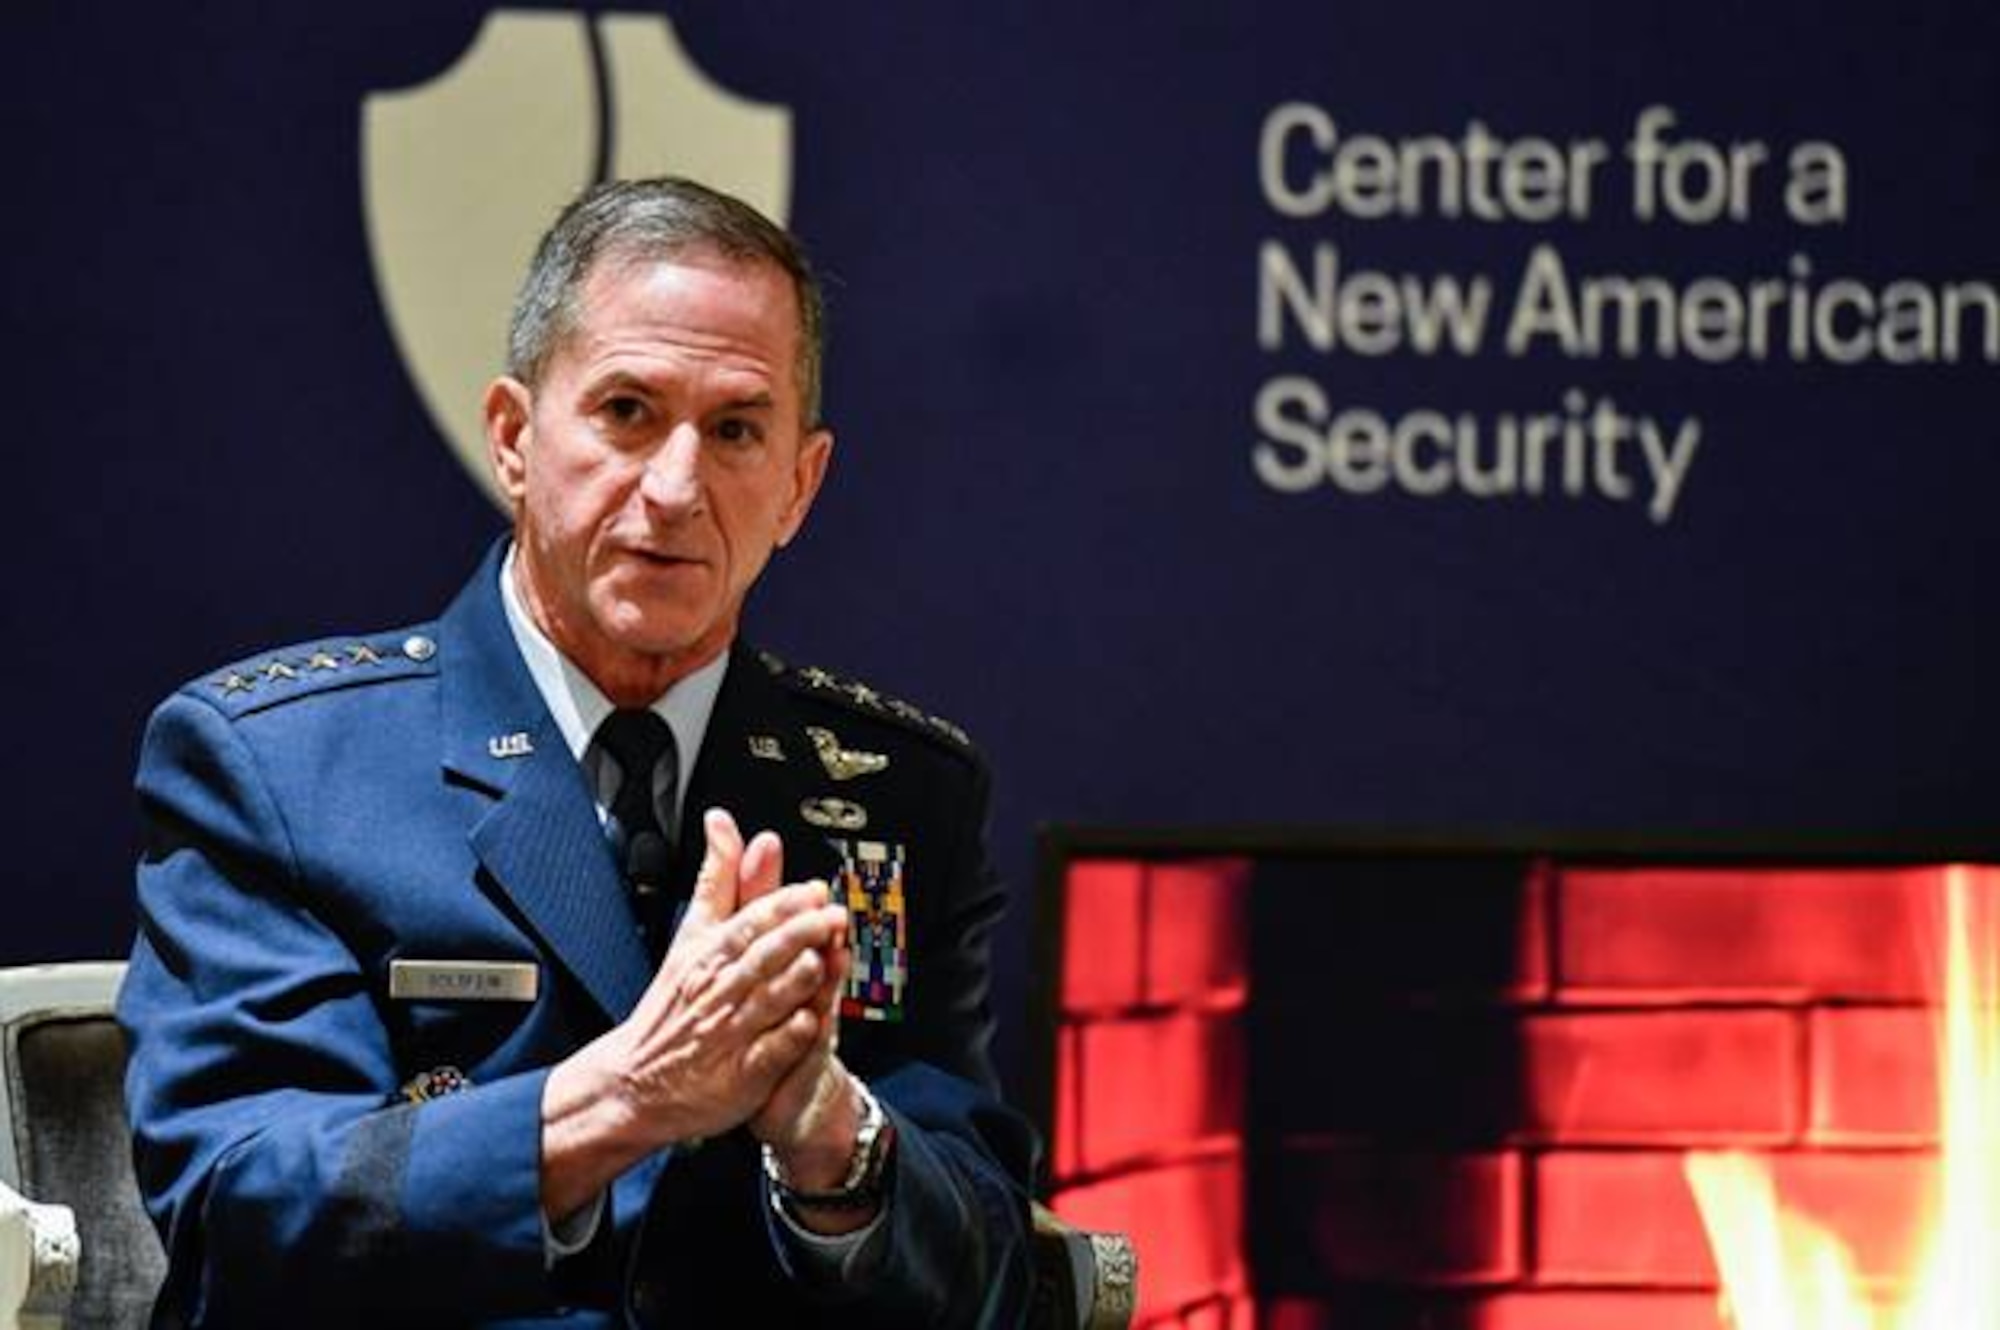 Air Force Chief of Staff Gen. David L. Goldfein during an appearance, Jan. 27, 2020, at the Center for a New American Security, emphasized the importance of a strong presence in space and the need to harness data. Both, he said, are central to ensuring that the Air Force is able to meet and prevail against modern-day threats. (U.S. Air Force photo by Eric Dietrich)